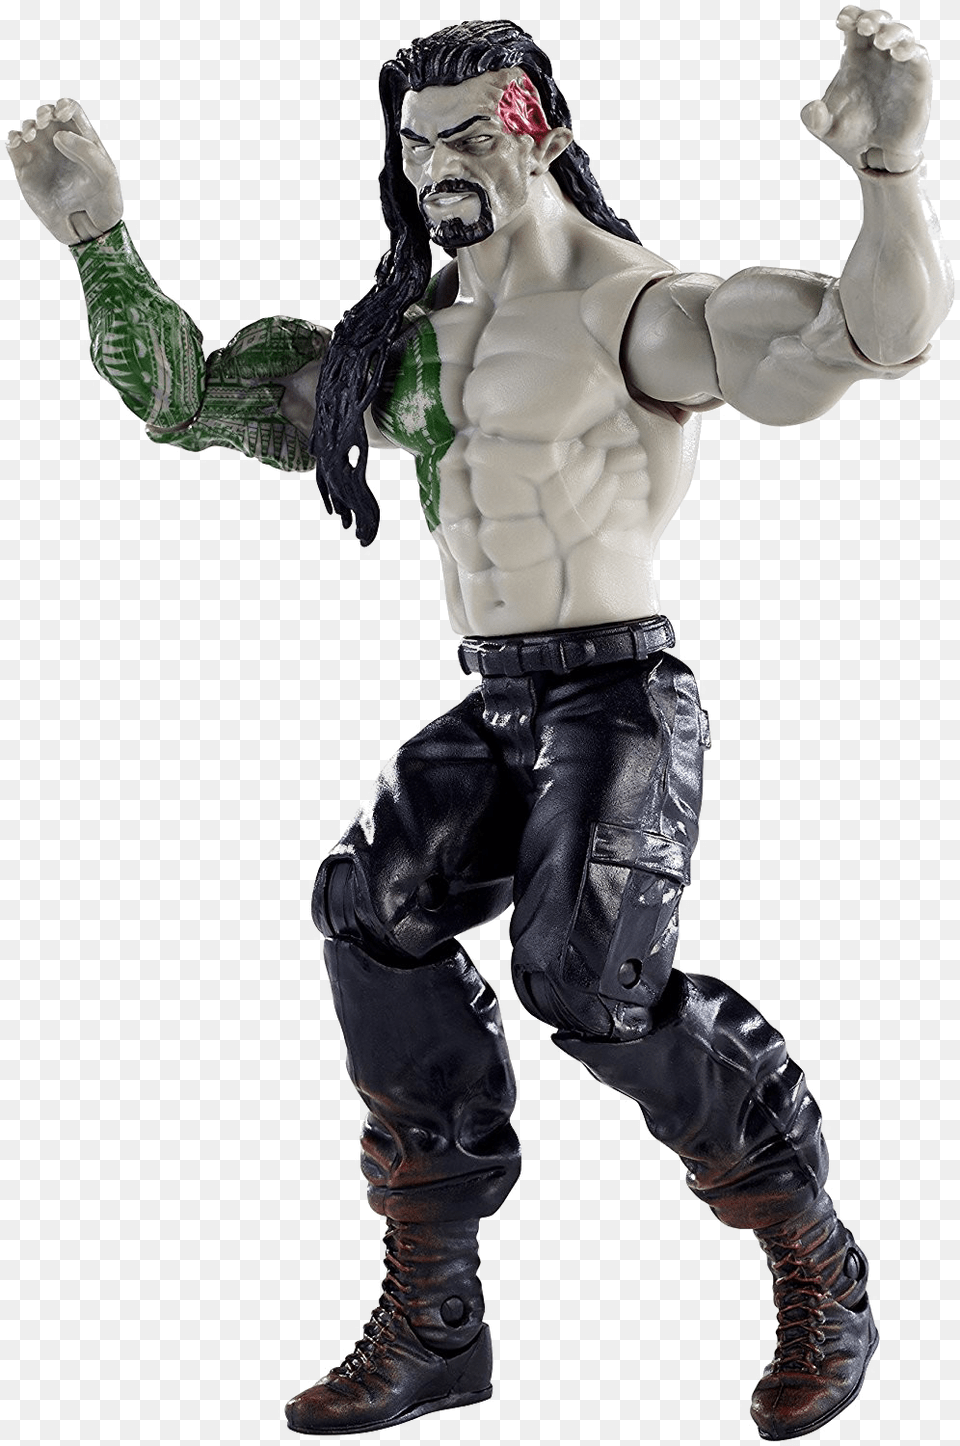 Zombie Background Roman Reigns Wwe Toys, Adult, Figurine, Male, Man Png Image